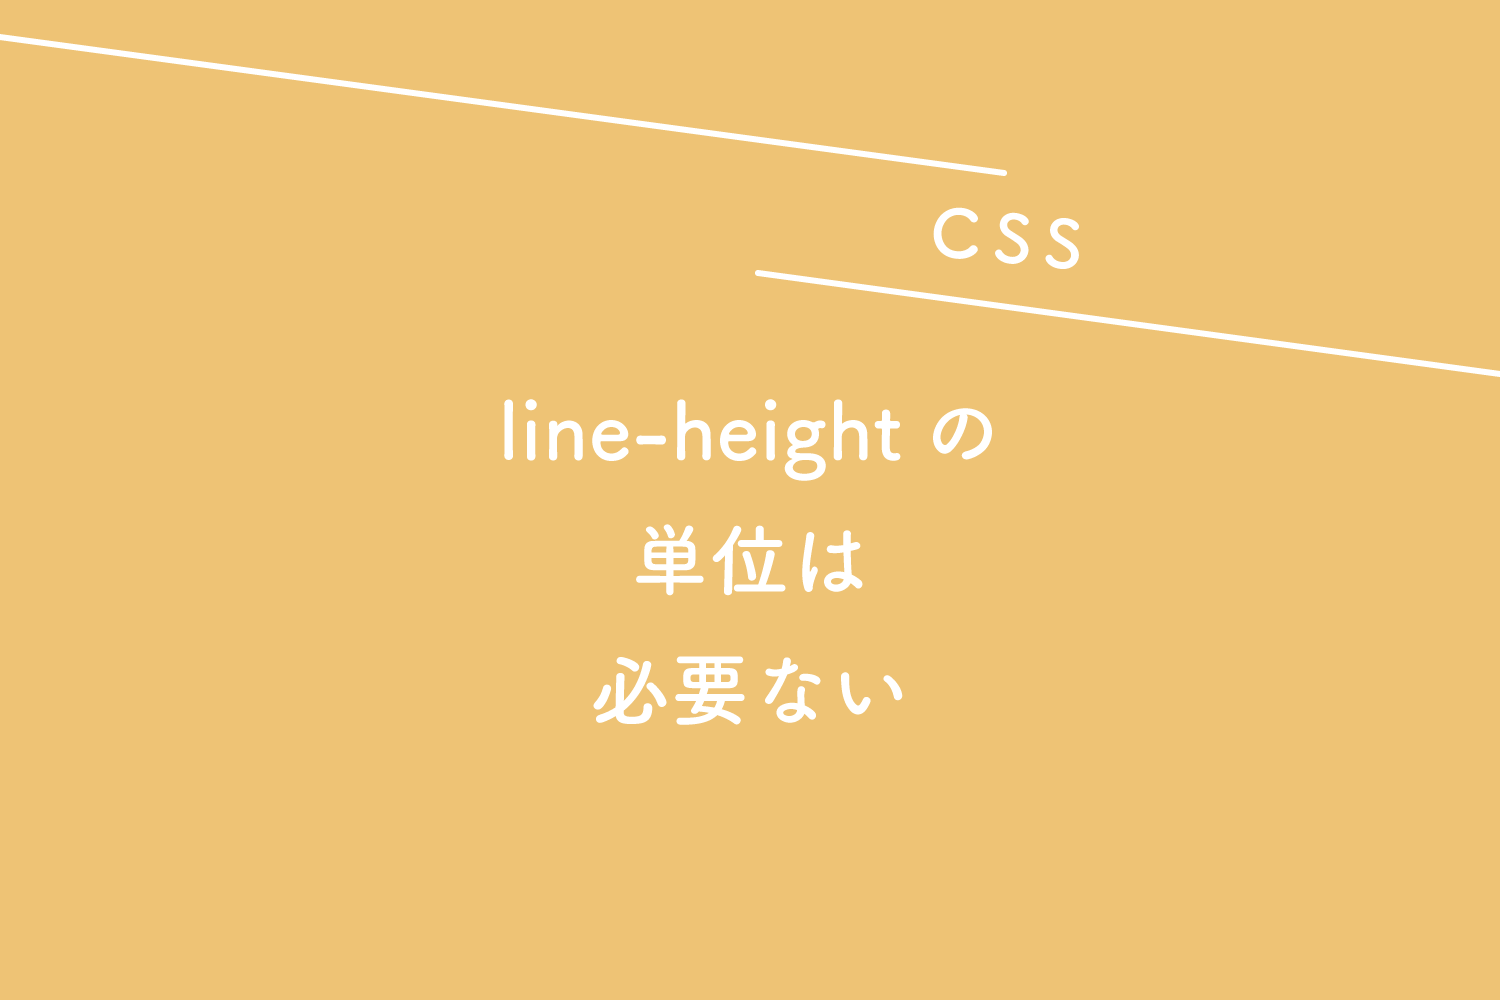 【CSS】line-heightの単位は必要ない